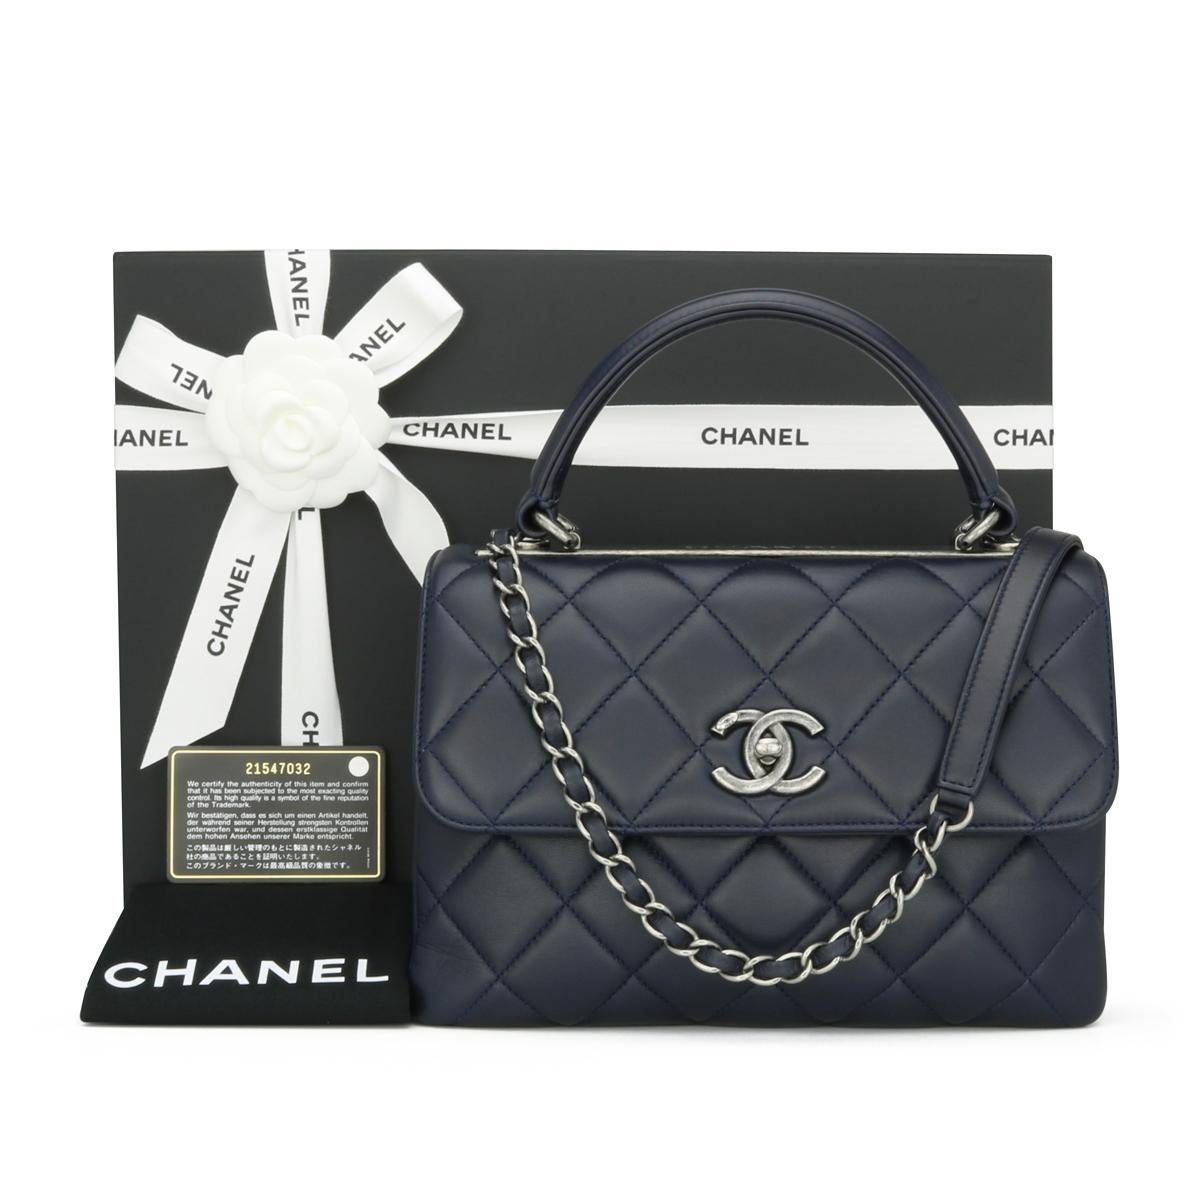 CHANEL Trendy CC Top Handle Bag Small Navy Blue Lambskin with Ruthenium Hardware 2015 – 15B.

This stunning bag is in very good condition, the bag still holds its shape very well, and the hardware is still very shiny.

This top handle bag is simply